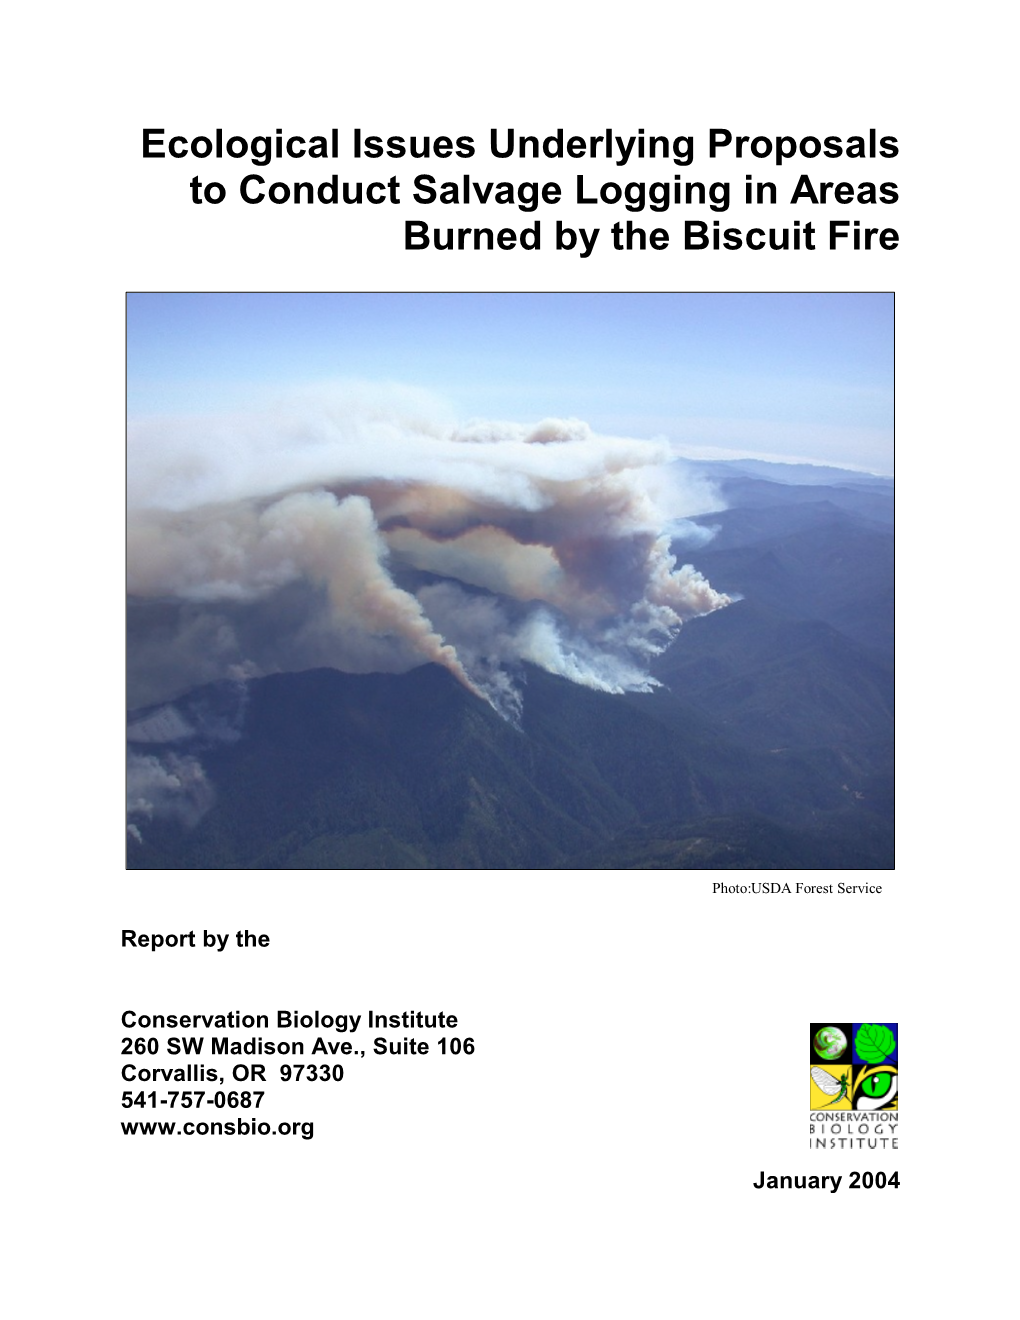 Ecological Issues Underlying Proposals to Conduct Salvage Logging in Areas Burned by the Biscuit Fire